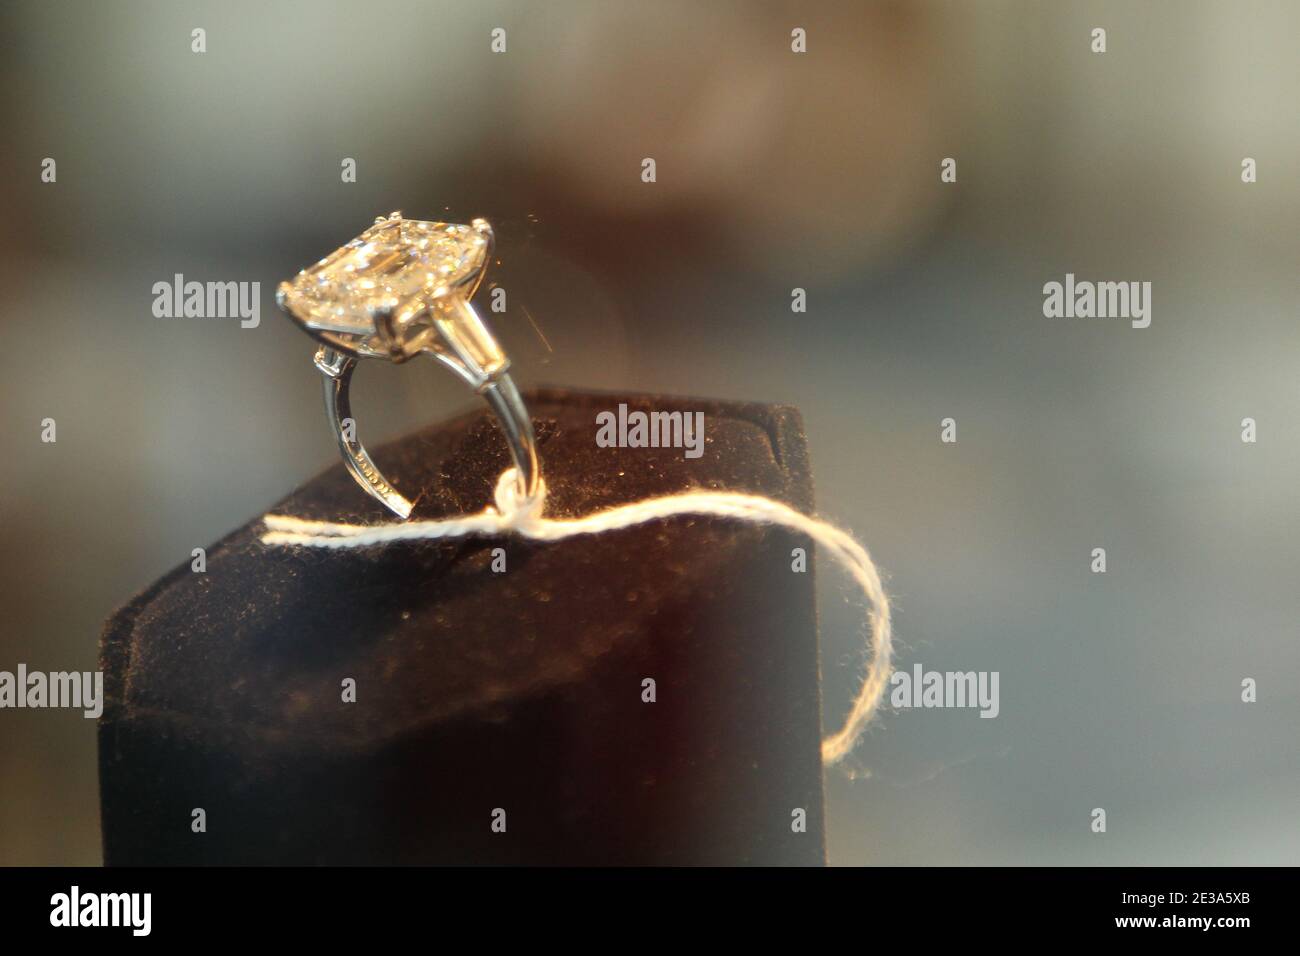 A 10.54 cts. diamond ring is displayed during a press preview of a U.S. Marshals Service auction of personal property seized from Bernard and Ruth Madoff in New York City, NY, USA on November 10, 2010. Photo by Elizabeth Pantaleo/ABACAPRESS.COM Stock Photo